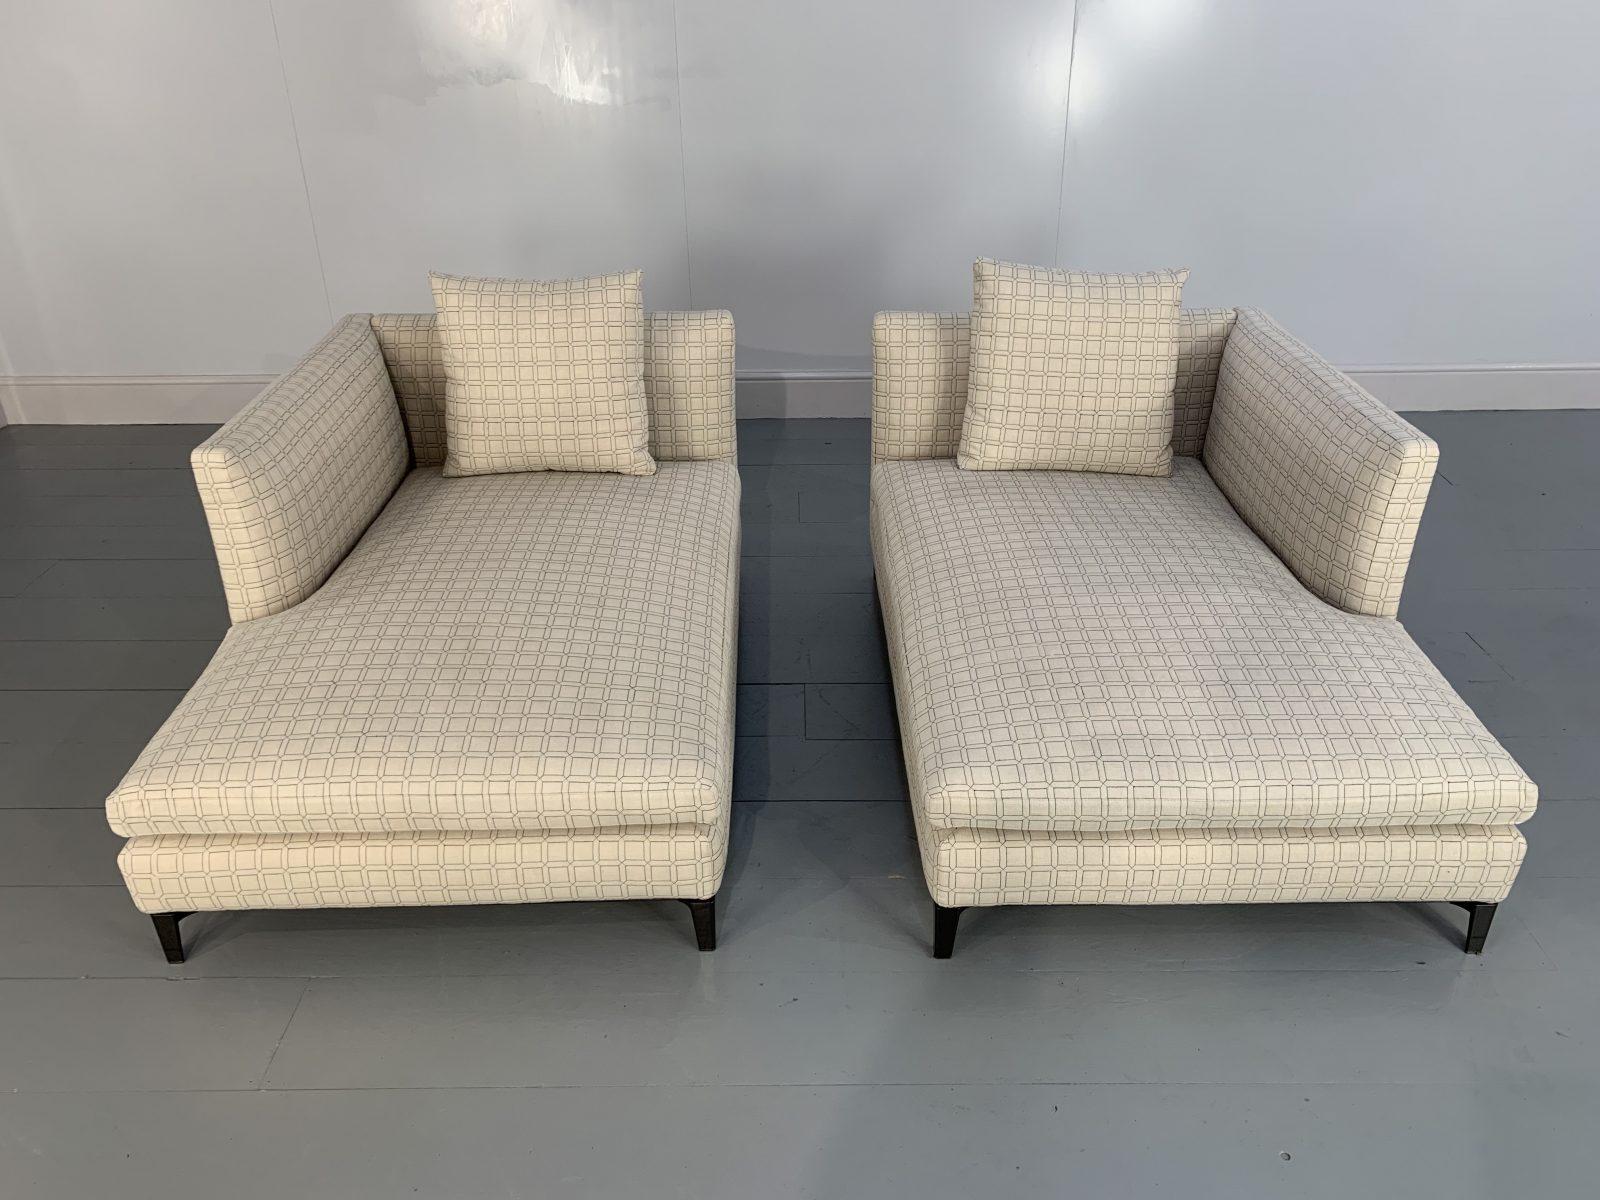 This is a superb, identical pair of Minotti “Andersen” Chaise Sofas (which, as you will see, can be configured to create a sofa/daybed) dressed in a peerless, top-grade natural, neutral-linen fabric with a geometric, woven-pattern in black, and with